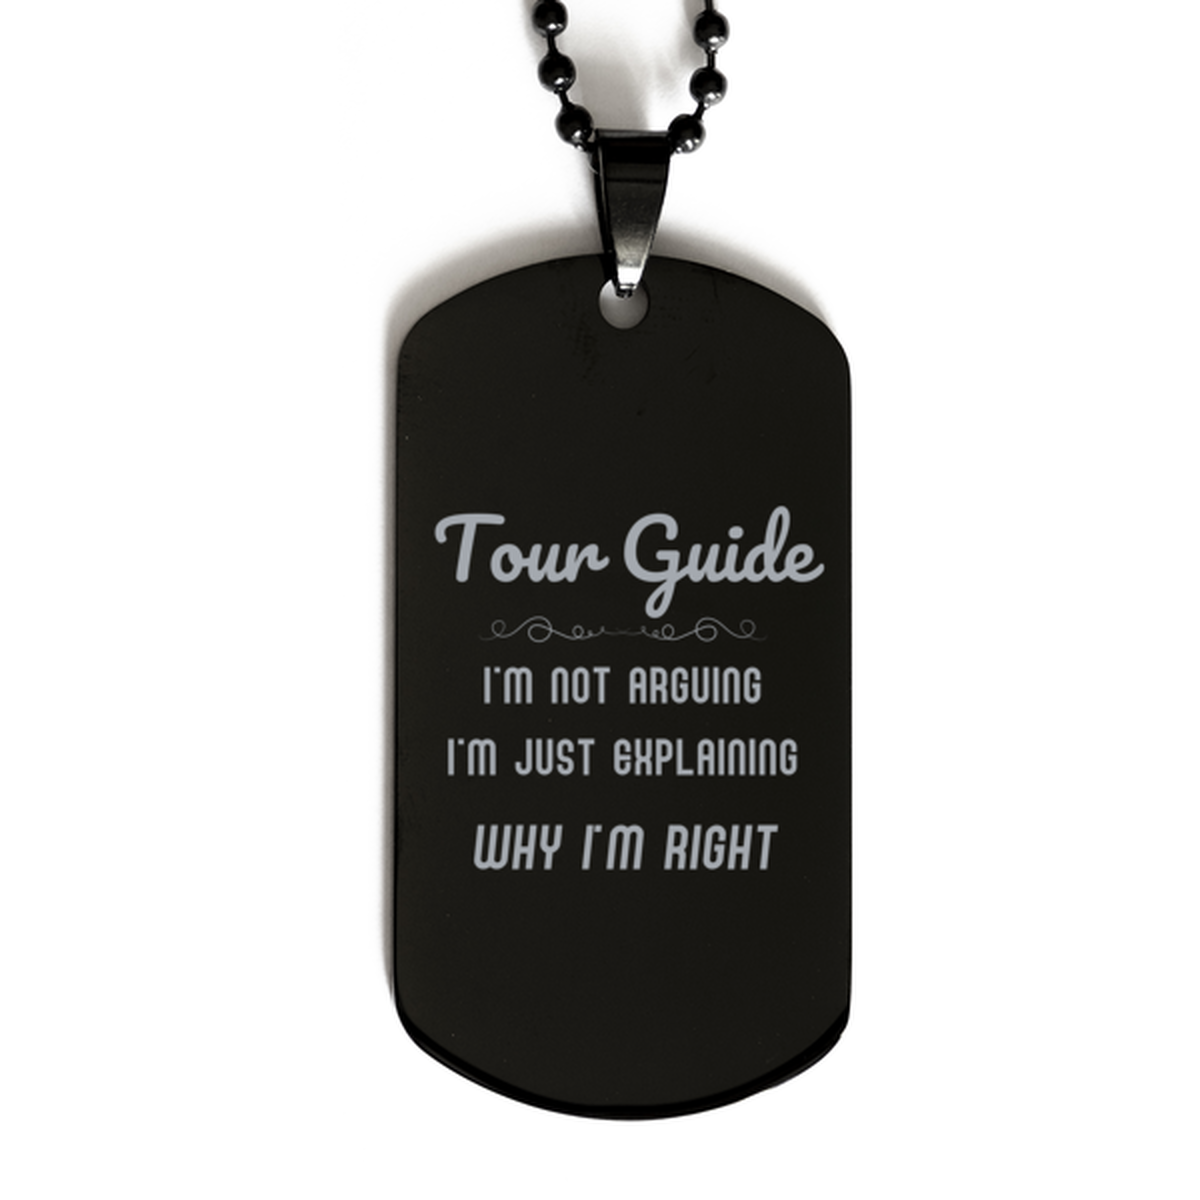 Tour Guide I'm not Arguing. I'm Just Explaining Why I'm RIGHT Black Dog Tag, Funny Saying Quote Tour Guide Gifts For Tour Guide Graduation Birthday Christmas Gifts for Men Women Coworker